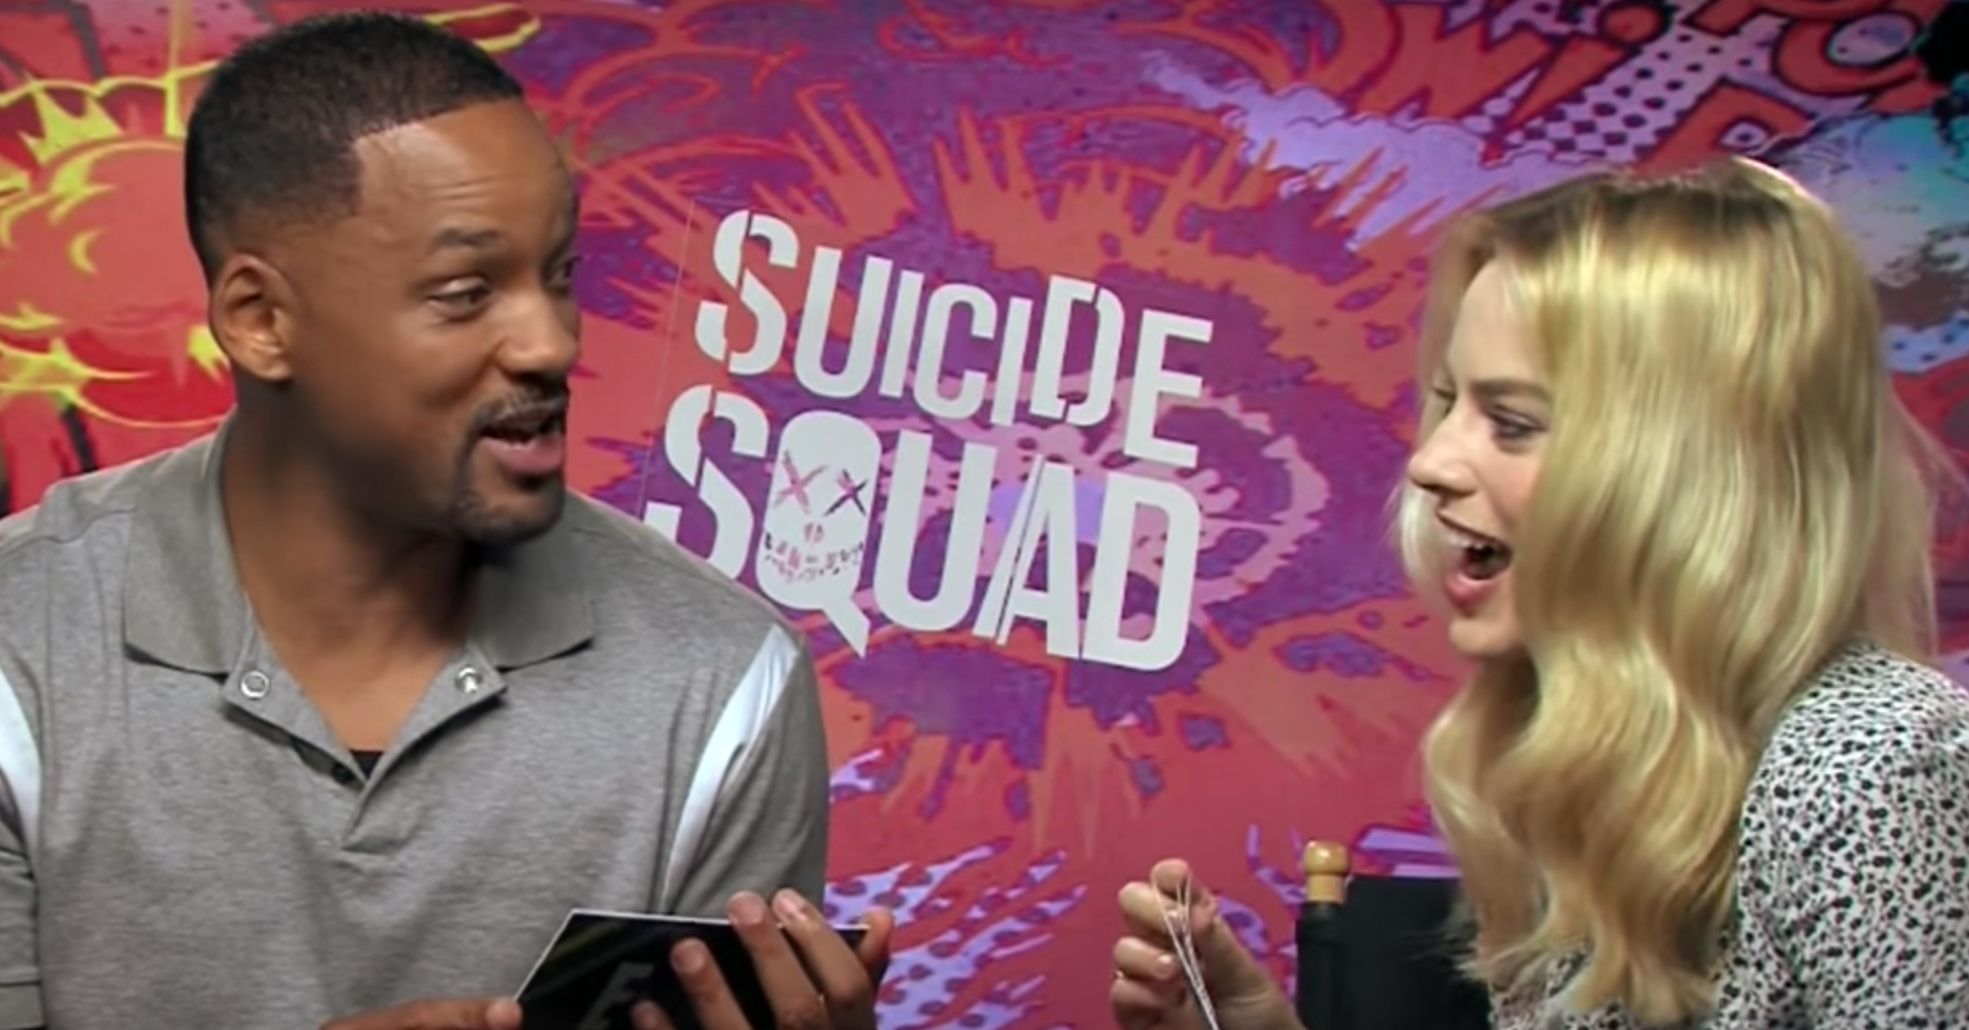 margot robbie and will smith interviewing each other